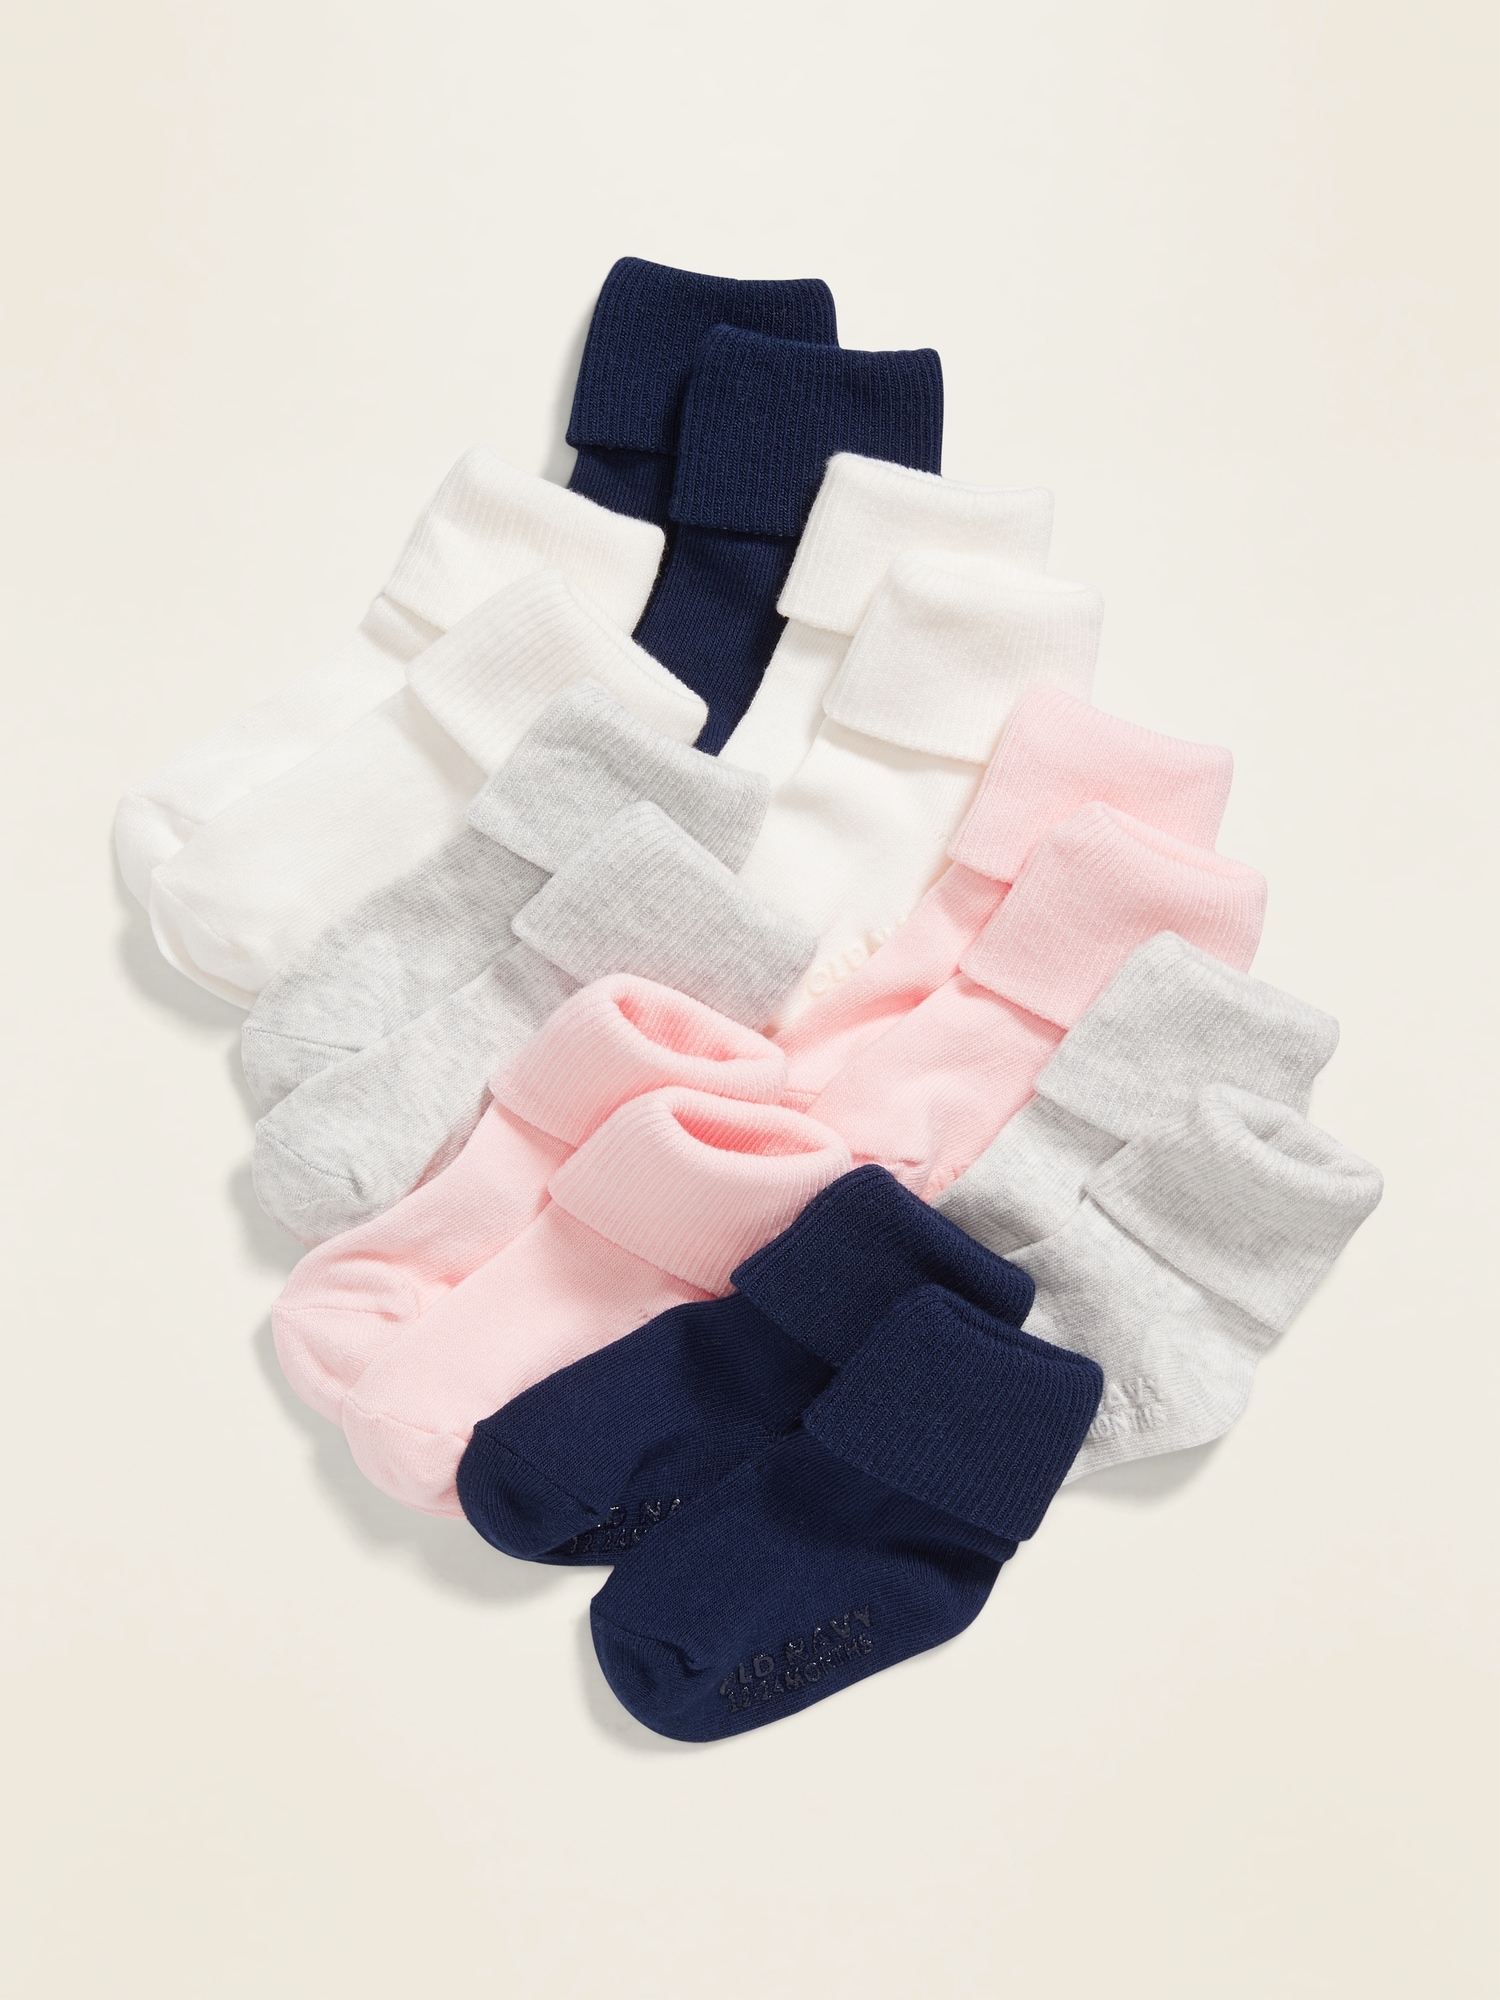 6 Pairs of BABY SOCKS TURN OVER TOP BOYS//GIRLS COLOURS